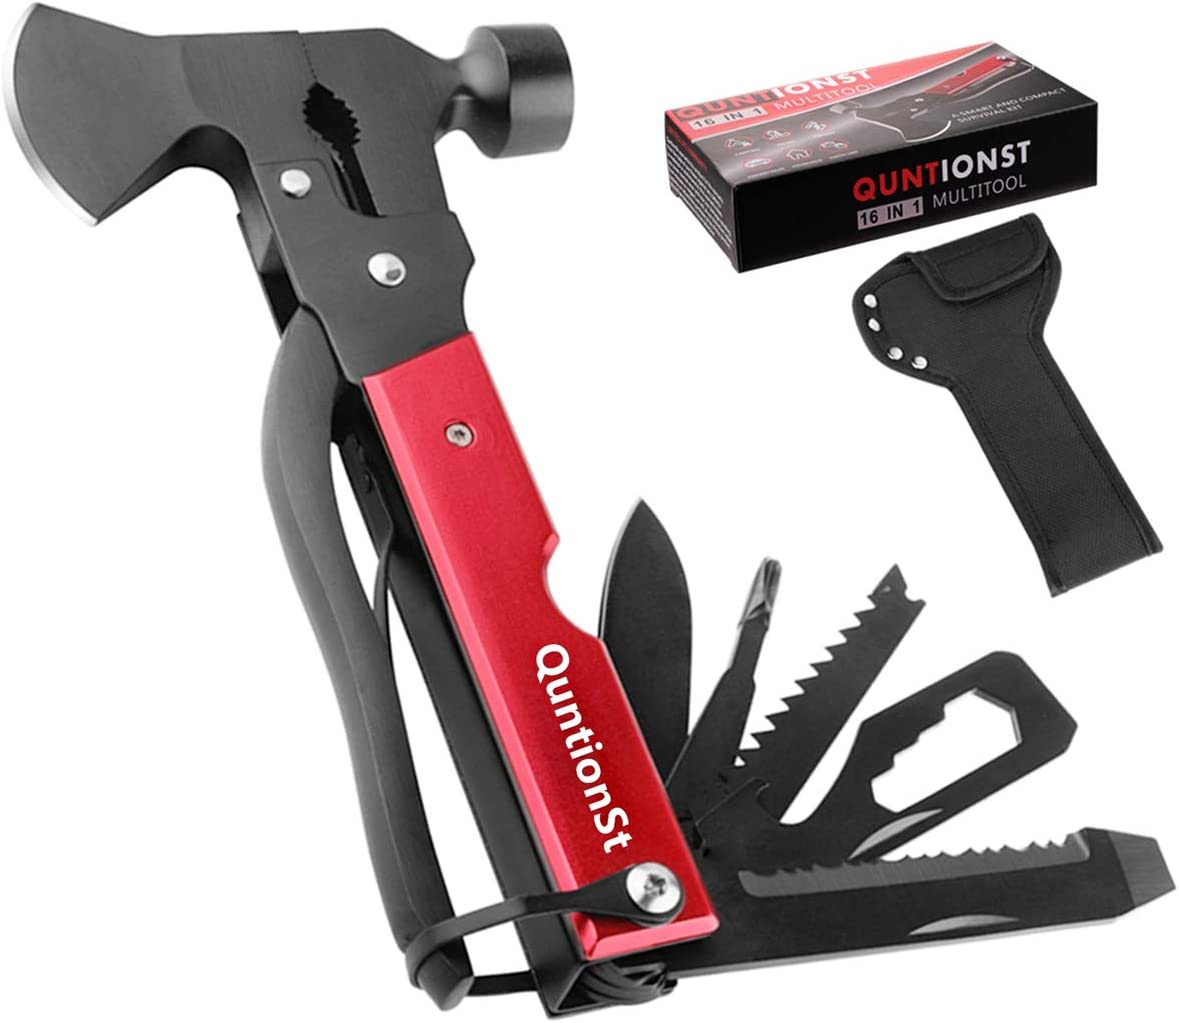 Camping Gear Multitool, Cool Christmas Gifts for Men Dad Husband Boyfriend, 16 in 1 Camping Accessories Multitool Hatchet, Survival Multi Tool Camping Tool with Axe,Hammer,Plier,Knife,Bottle Opener